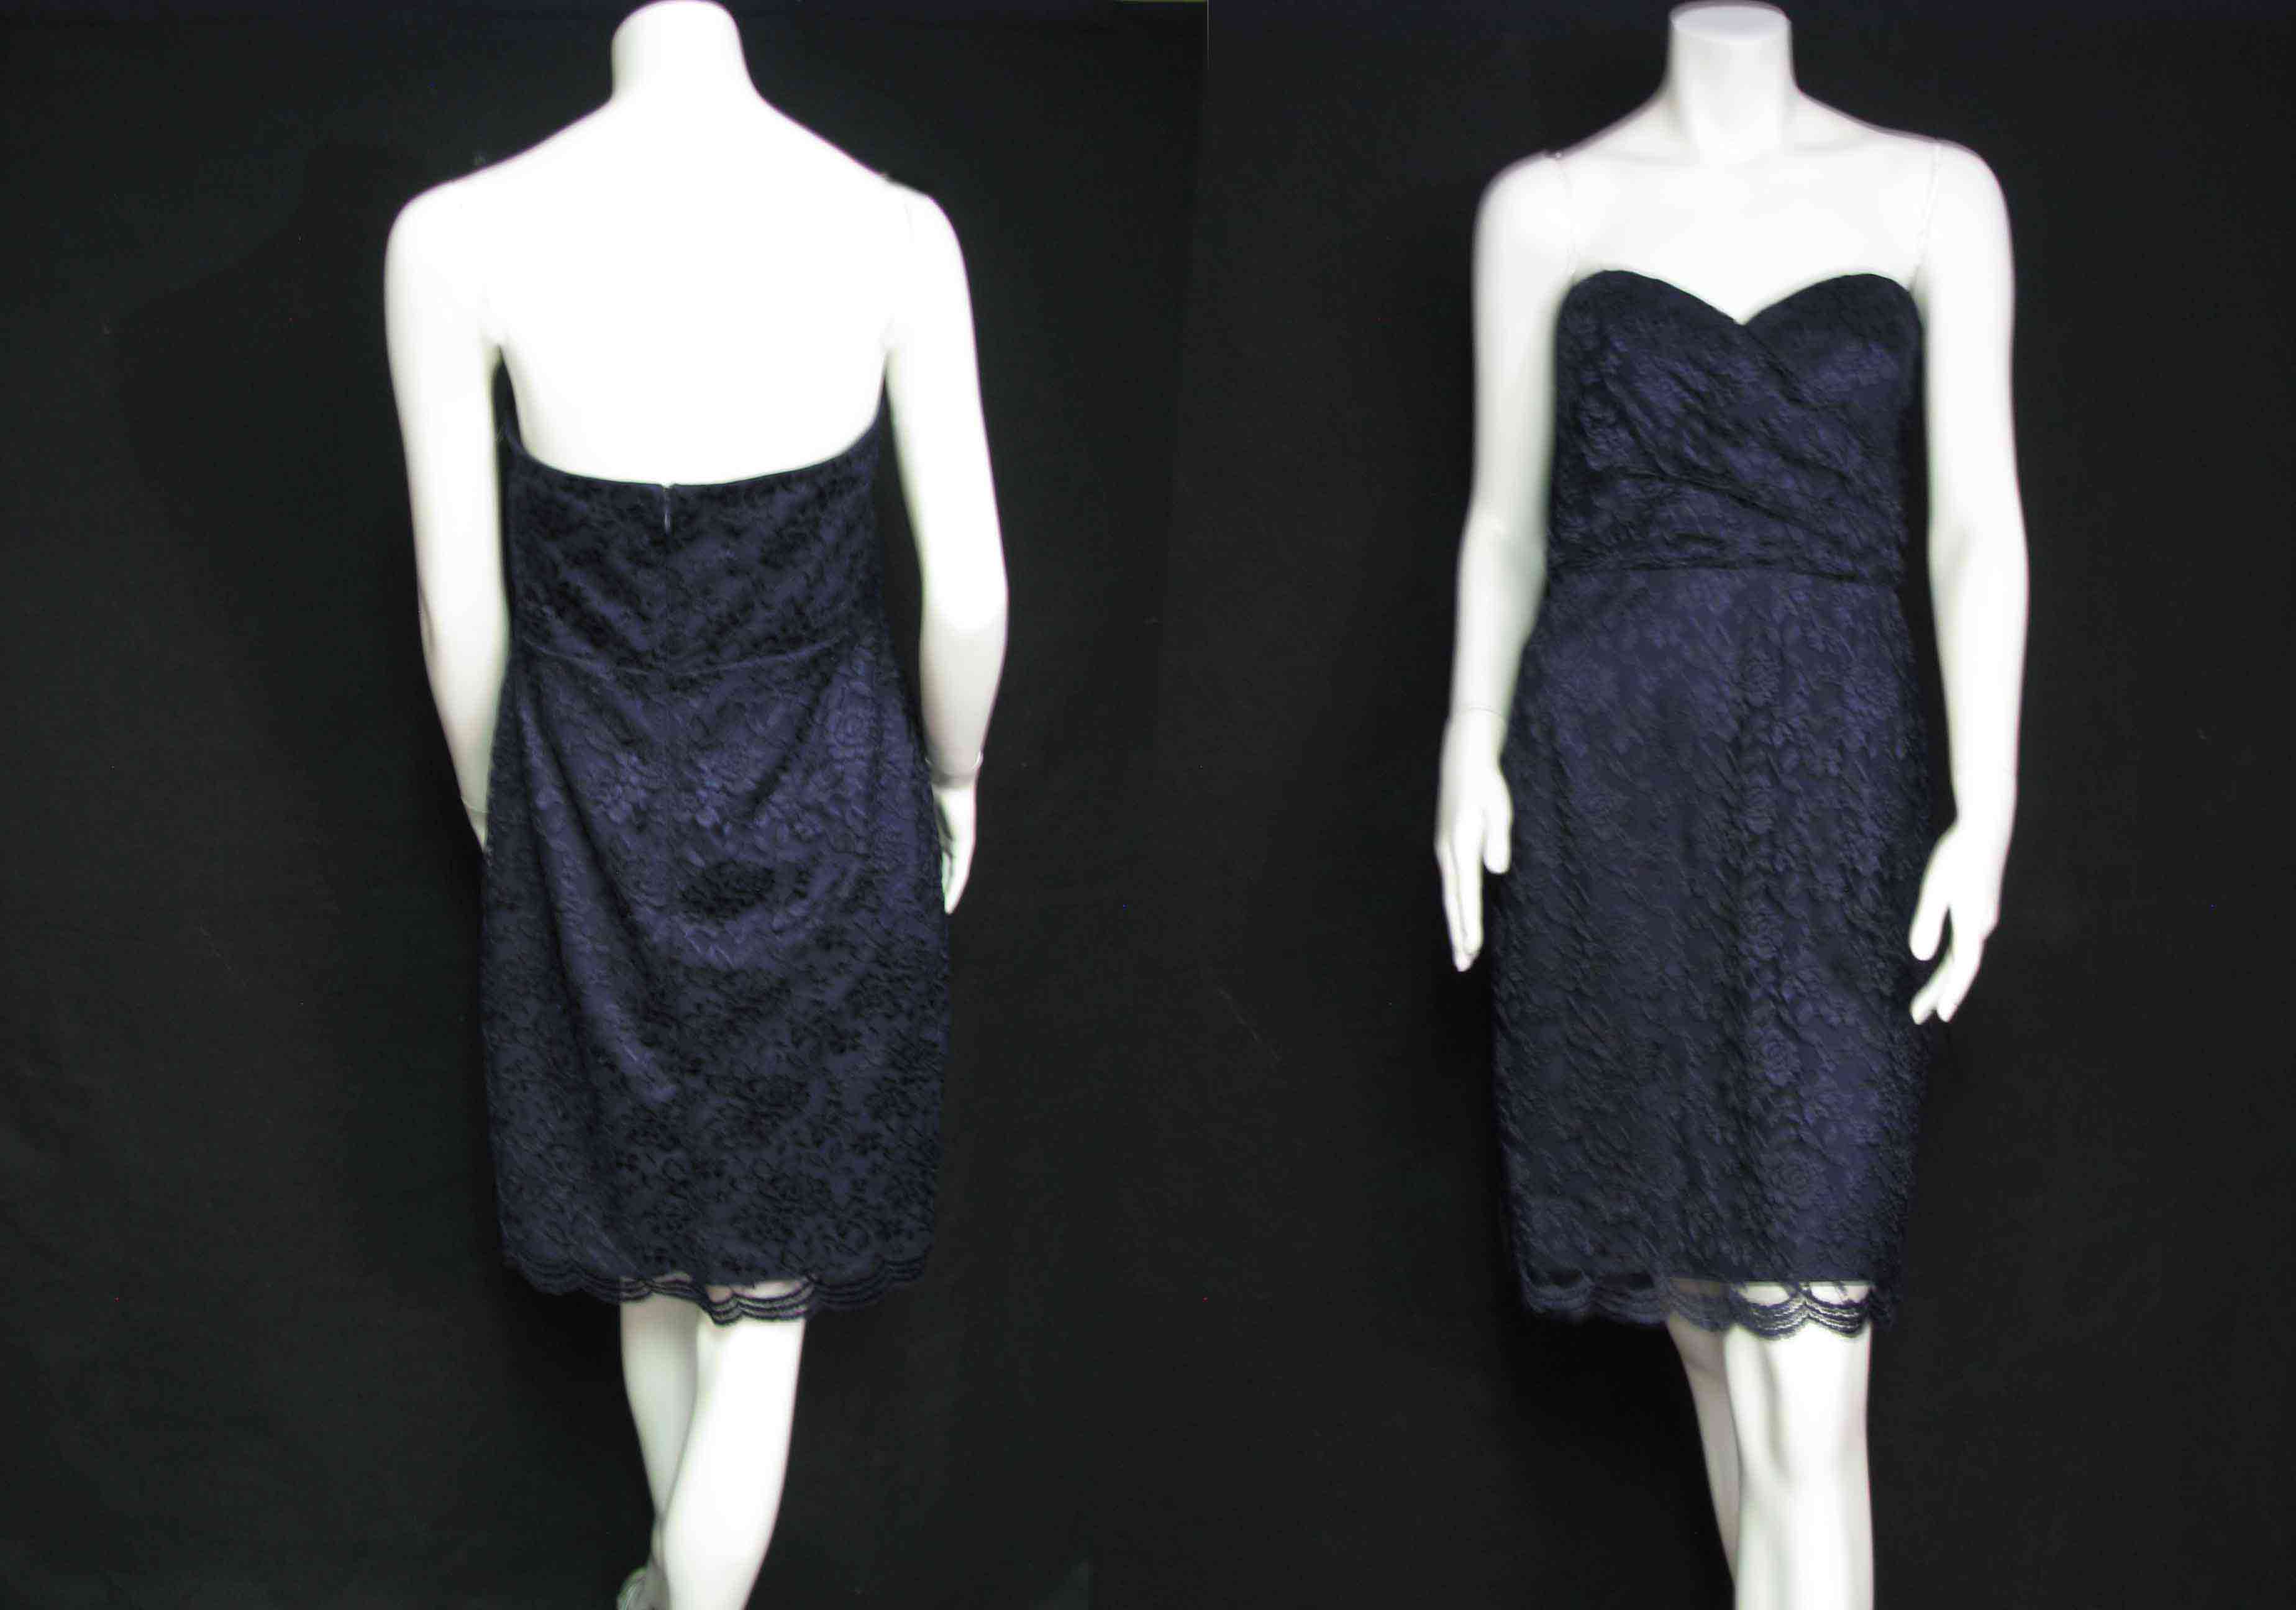 gowns.dress.340-6390.fb.navy.lace.jpg